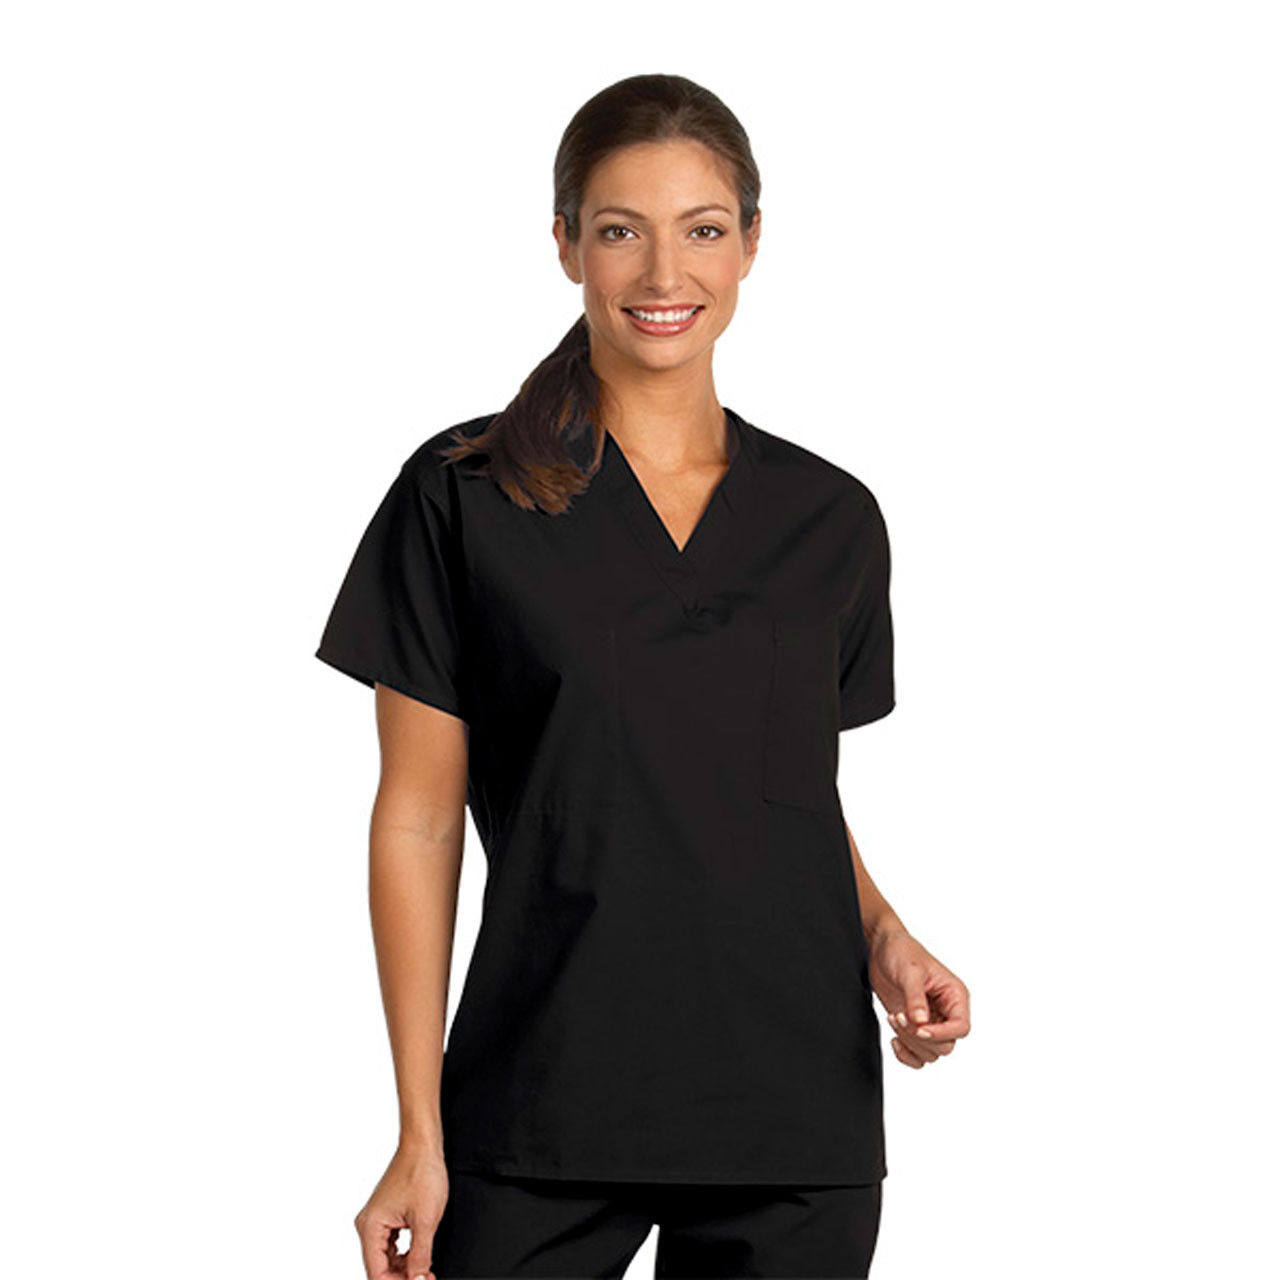 What fabric is used in Fashion Seal's black scrub set?